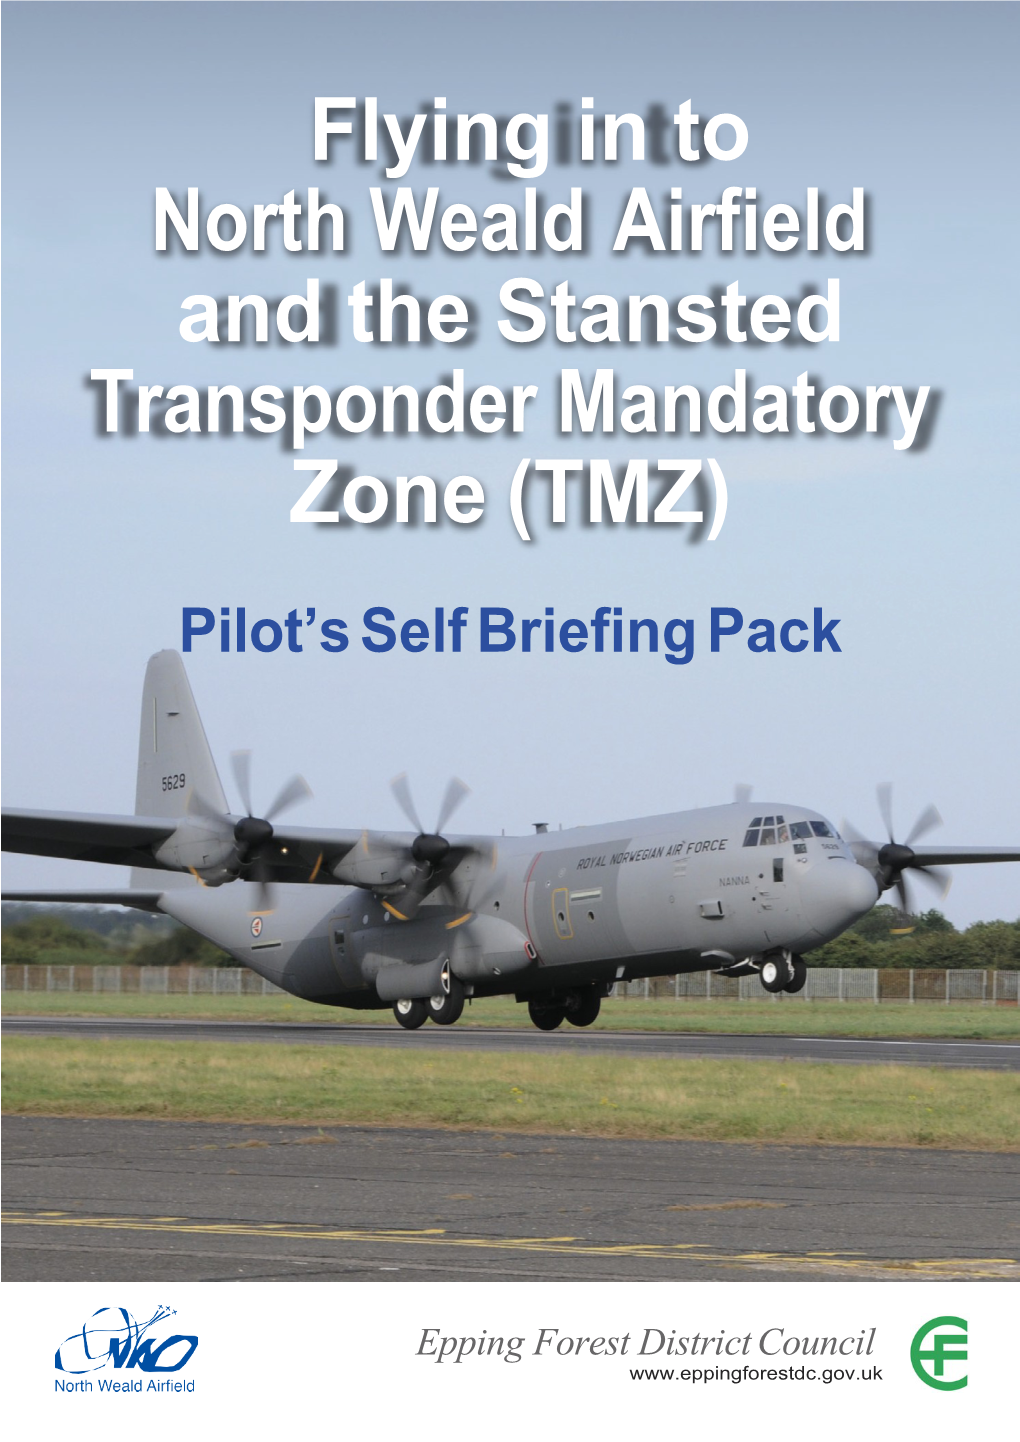 Flying in to North Weald Airfield and the Stansted Transponder Mandatory Zone (TMZ) Pilot’S Self Briefing Pack